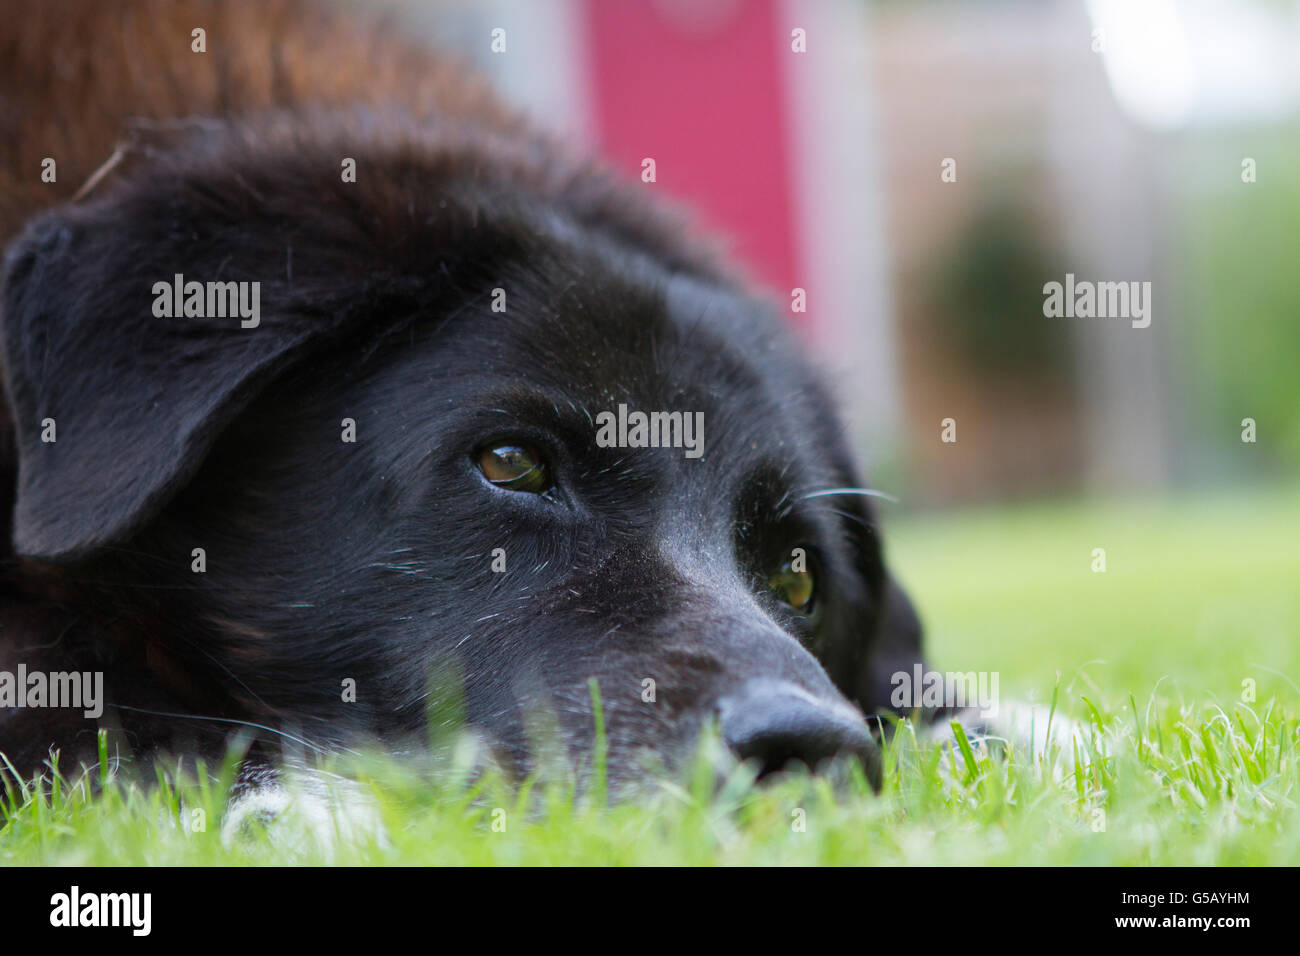 Close Up Black old dogs face lying on grass with selective focus Stock Photo